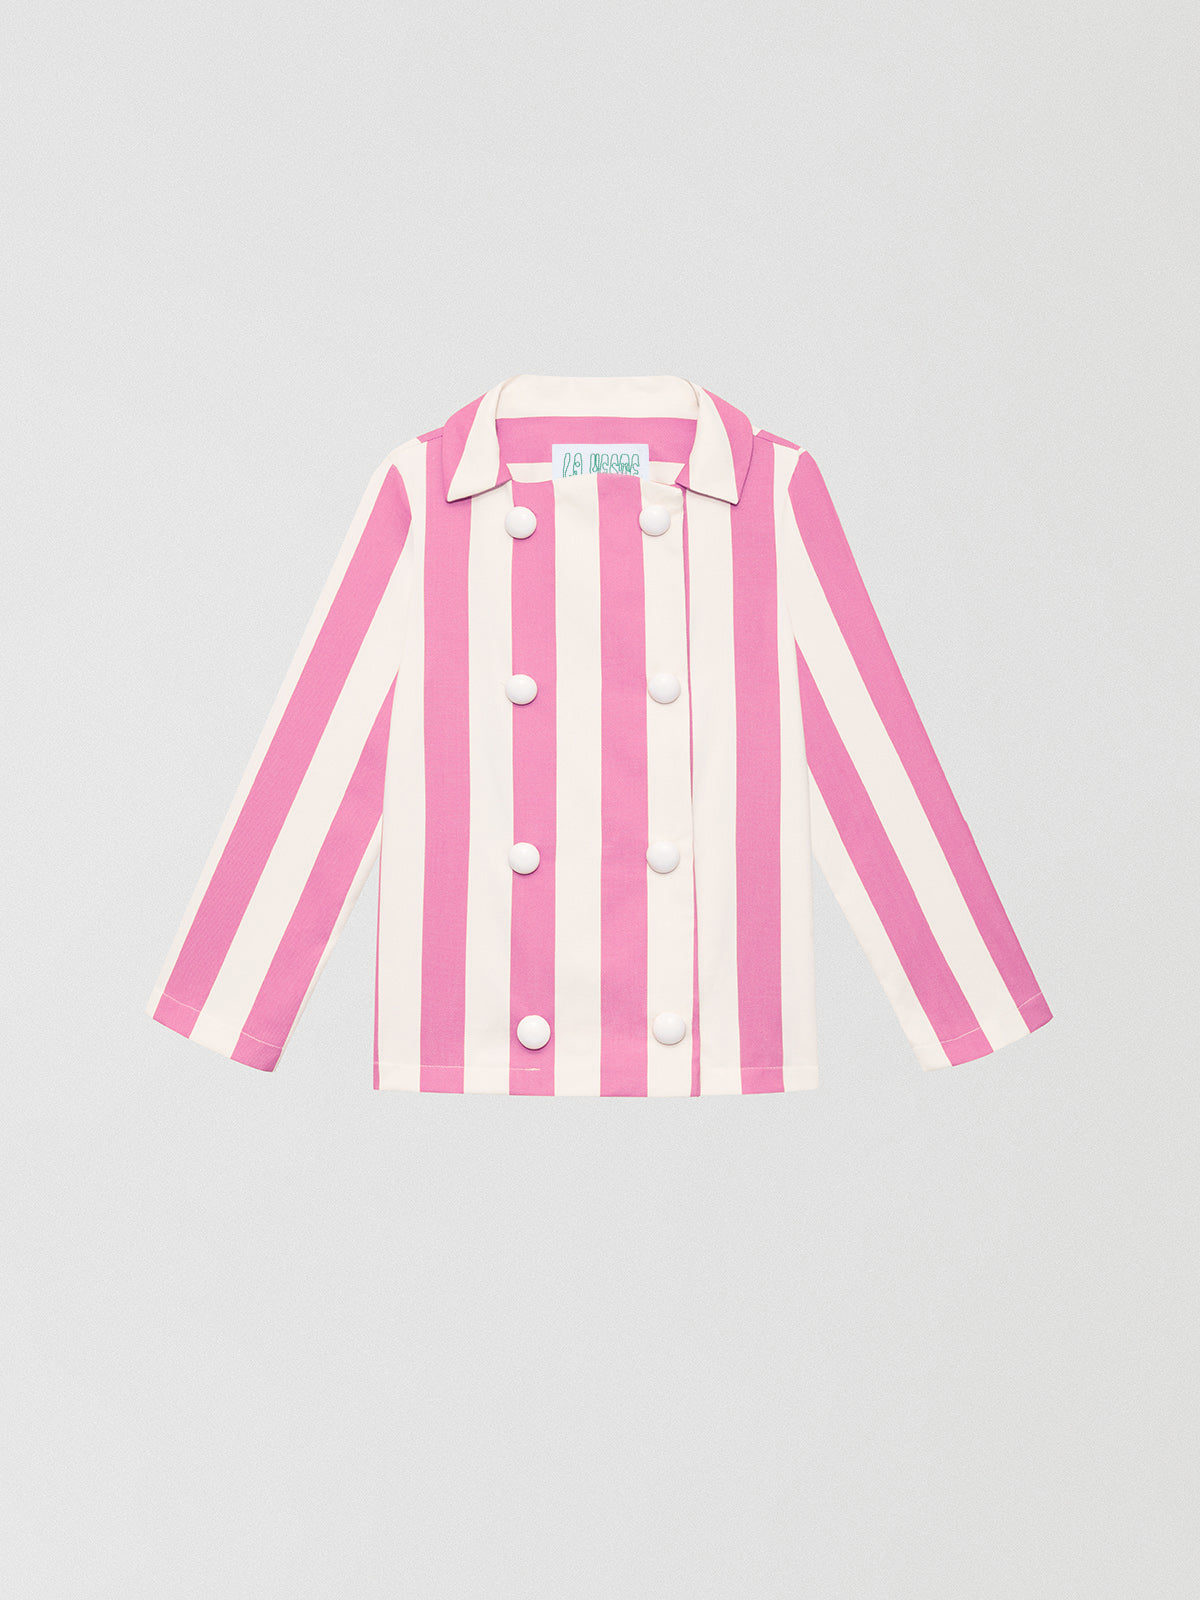 Parasol Pink Jacket is a pink and white striped jacket with XL white buttons and straight collar.